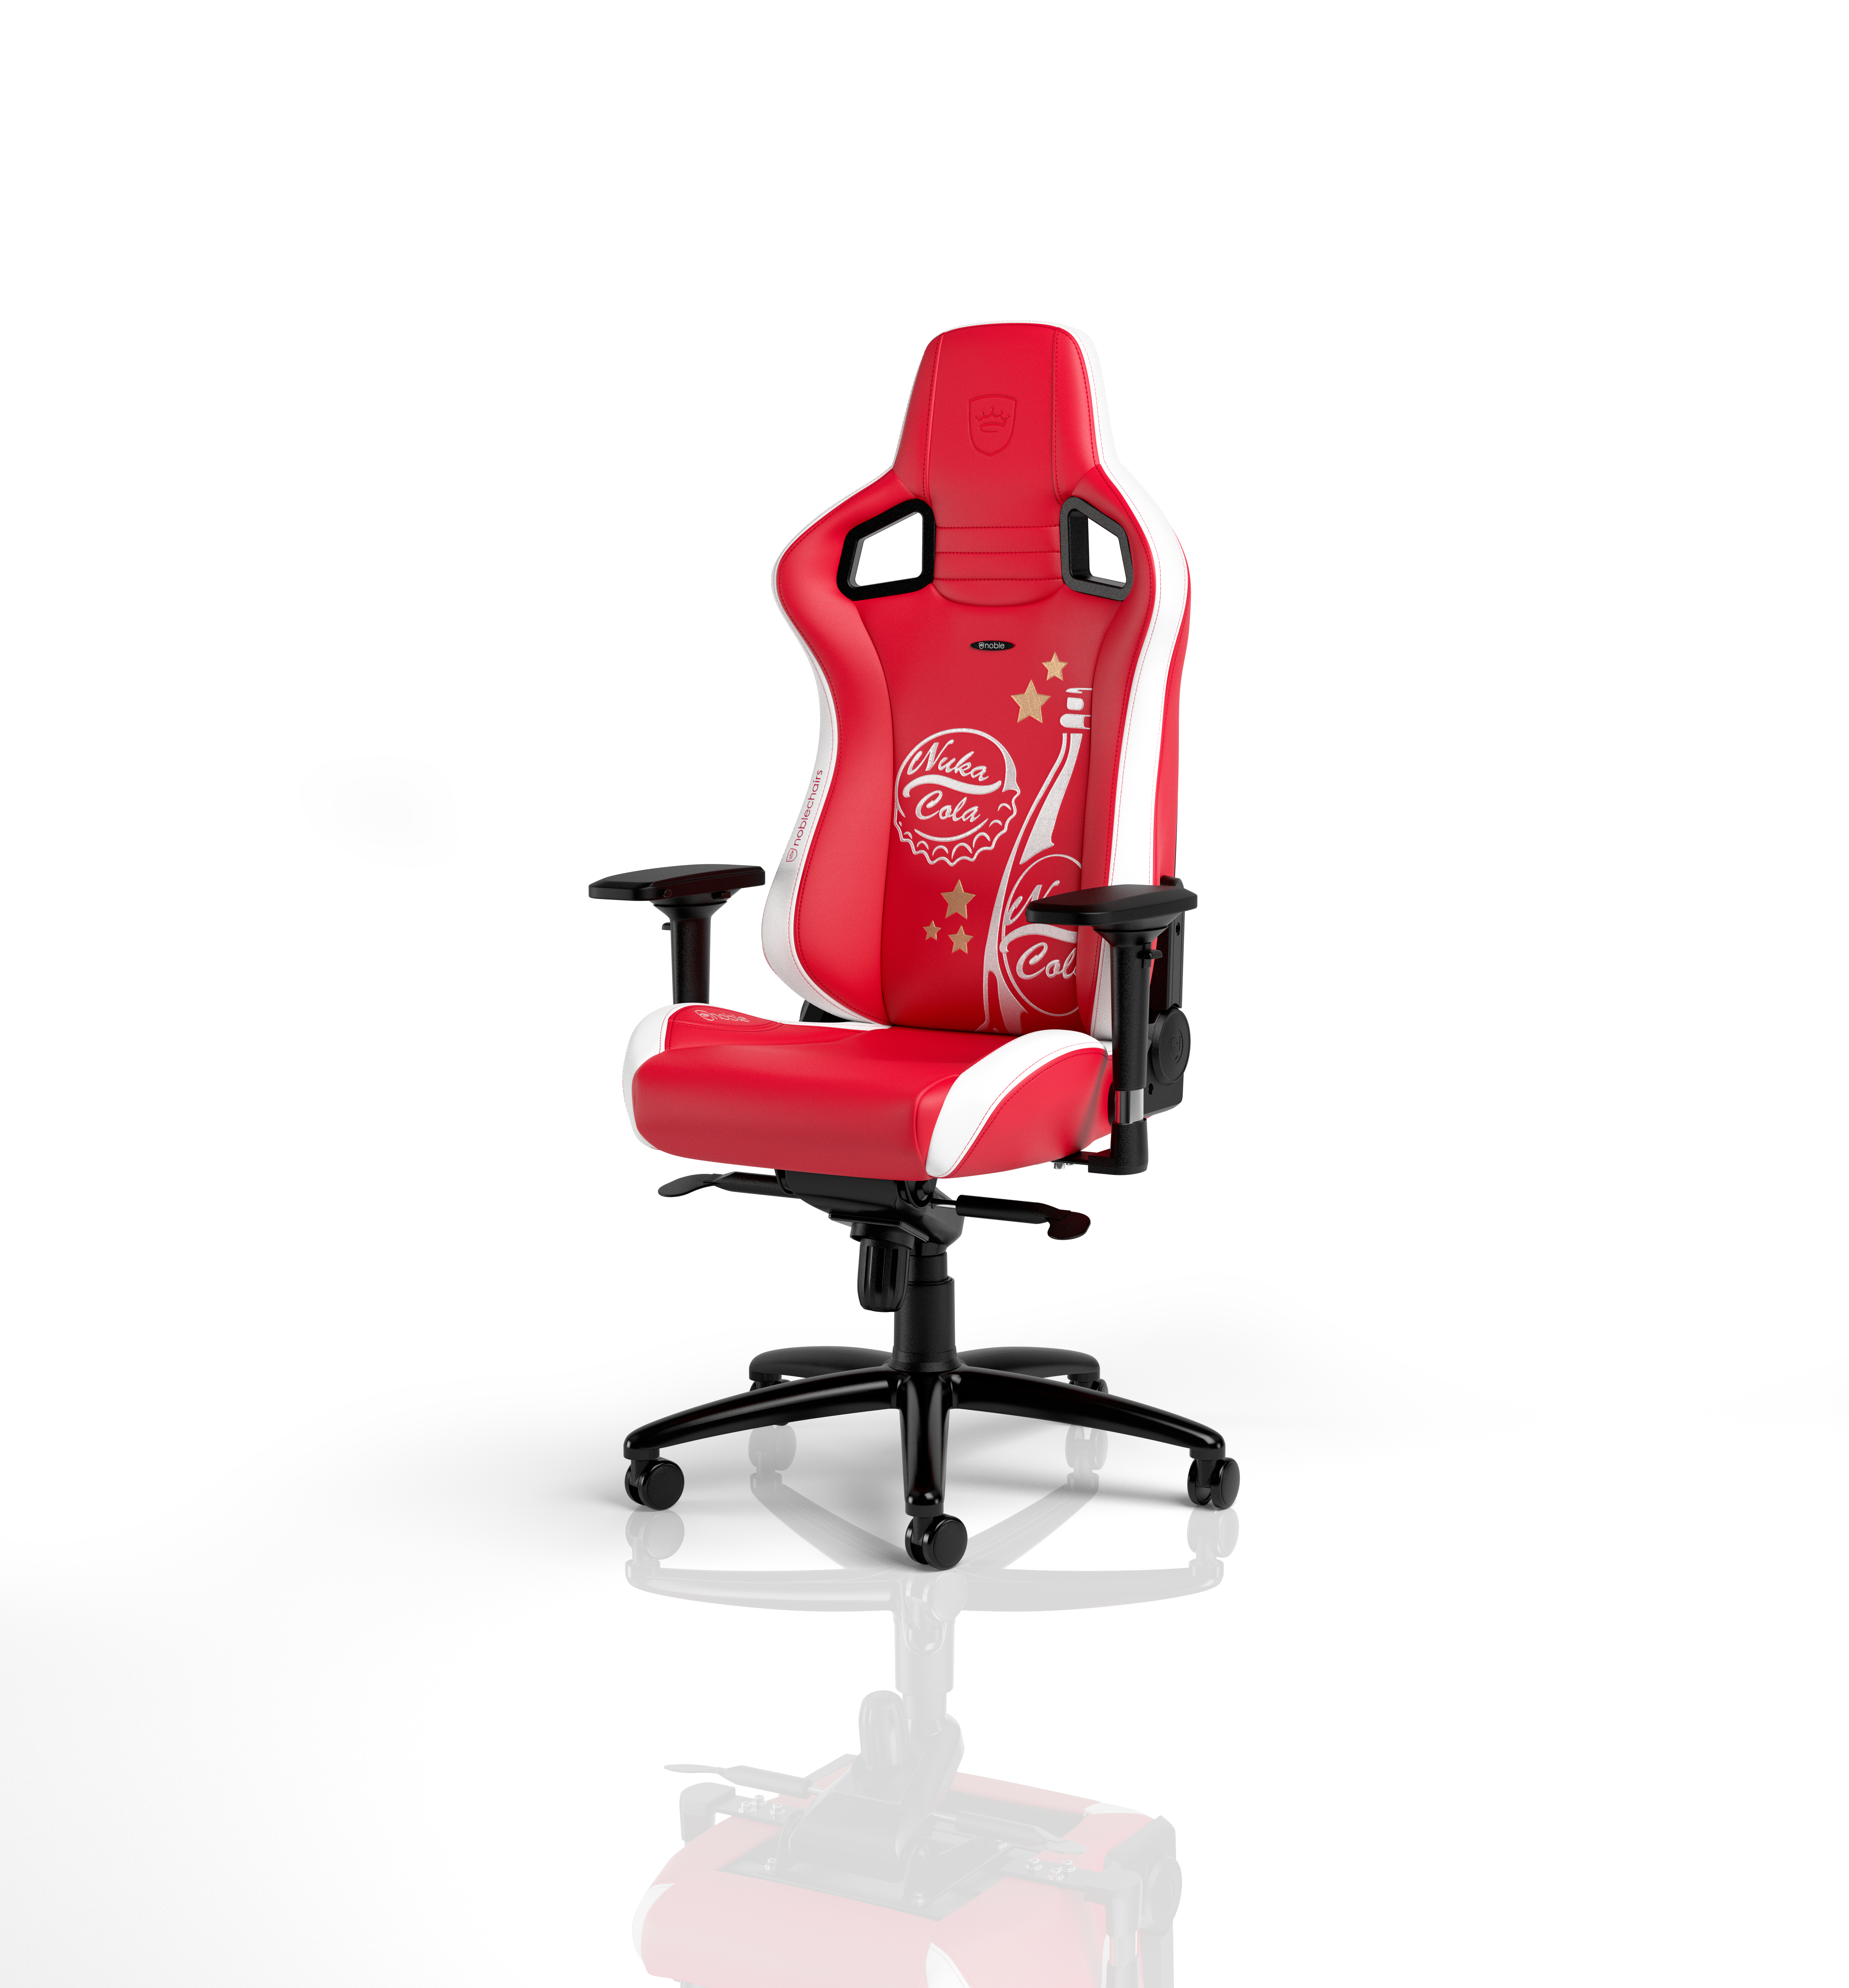 noblechairs EPIC Fallout Nuka-Cola Edition